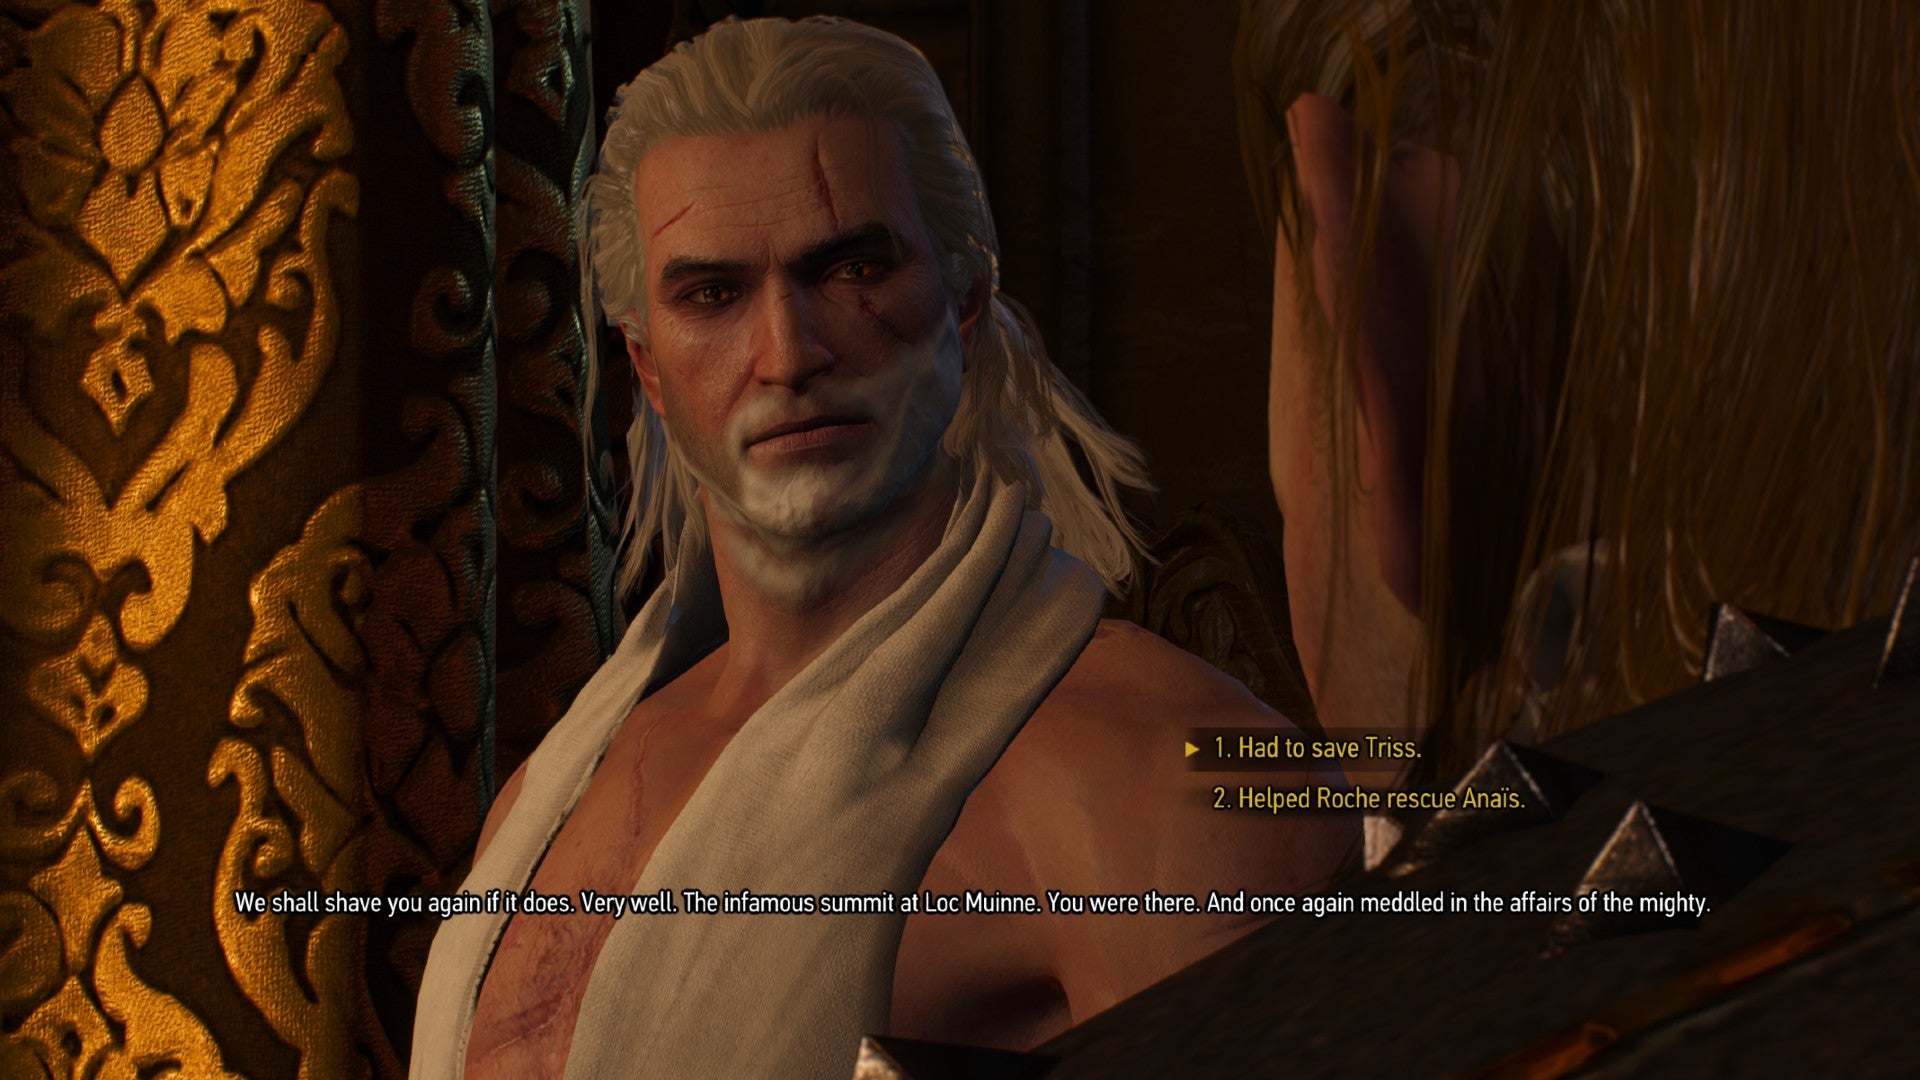 The Witcher 3 screenshot showing the third dialogue choice in the simulate witcher 2 conversation.